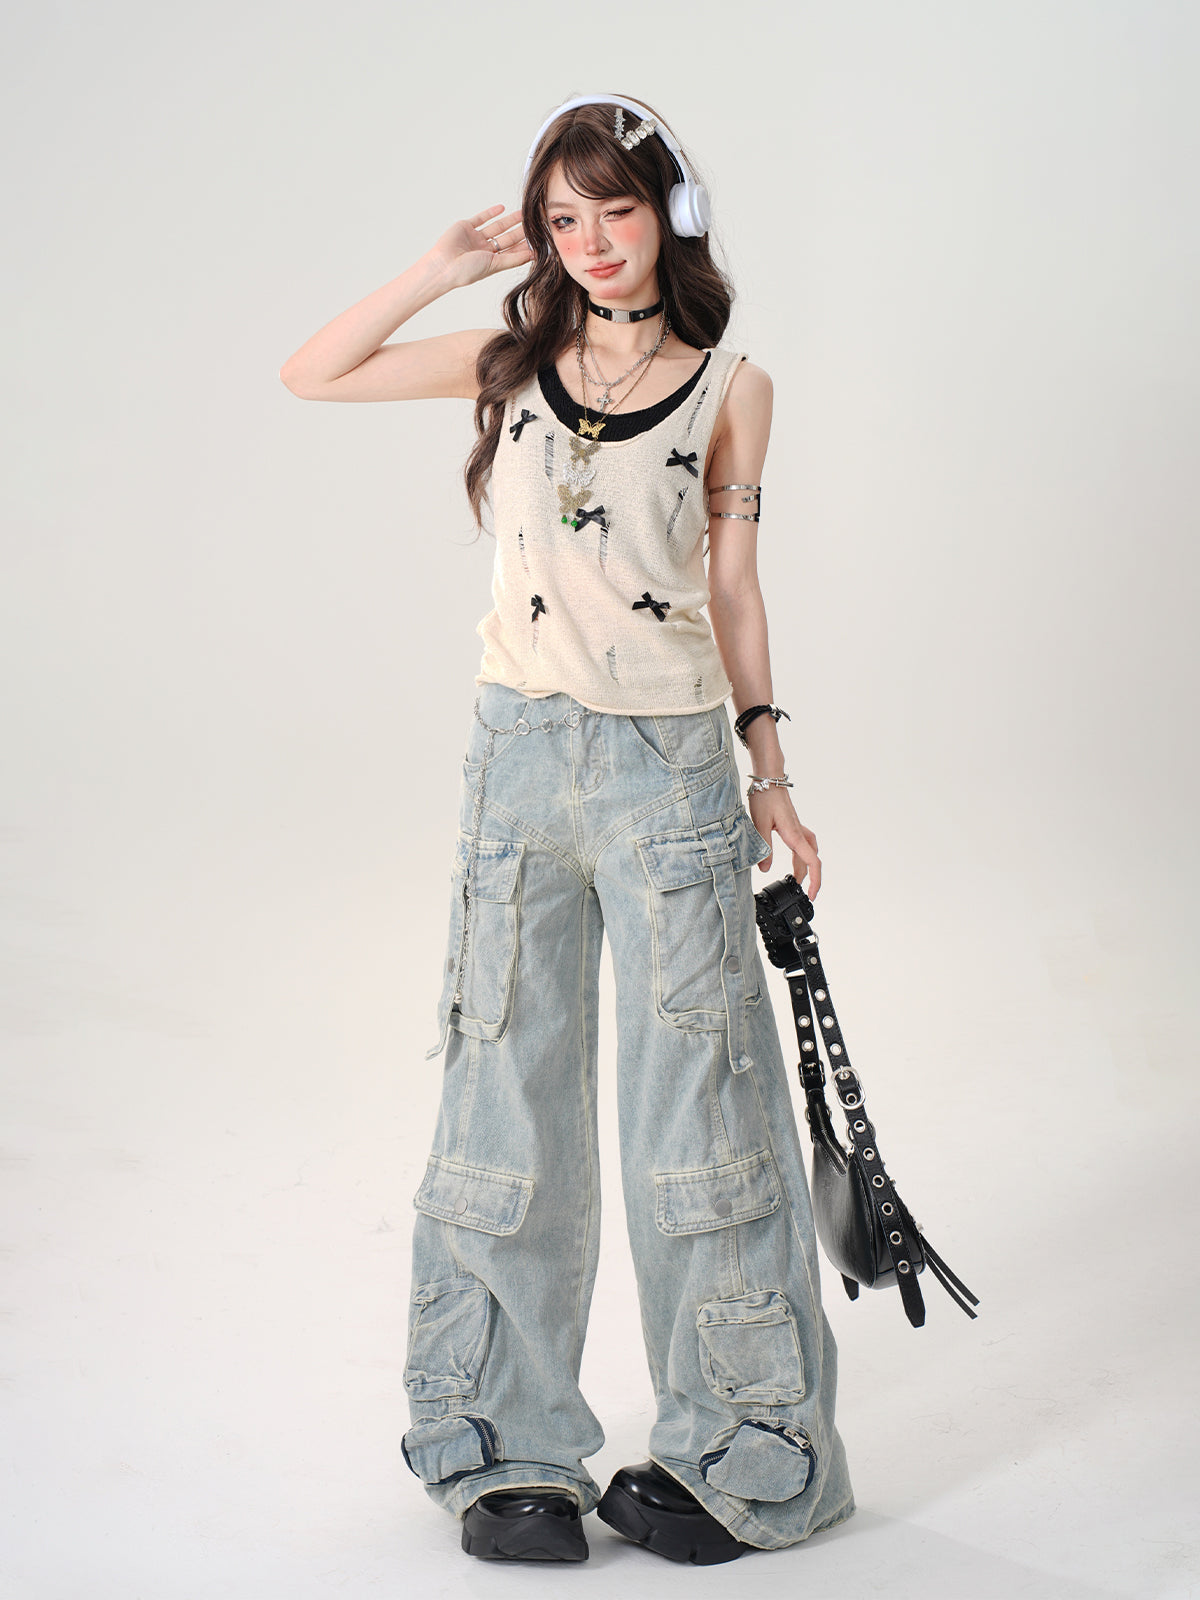 Street Party American Loose Jeans Cargo Pants